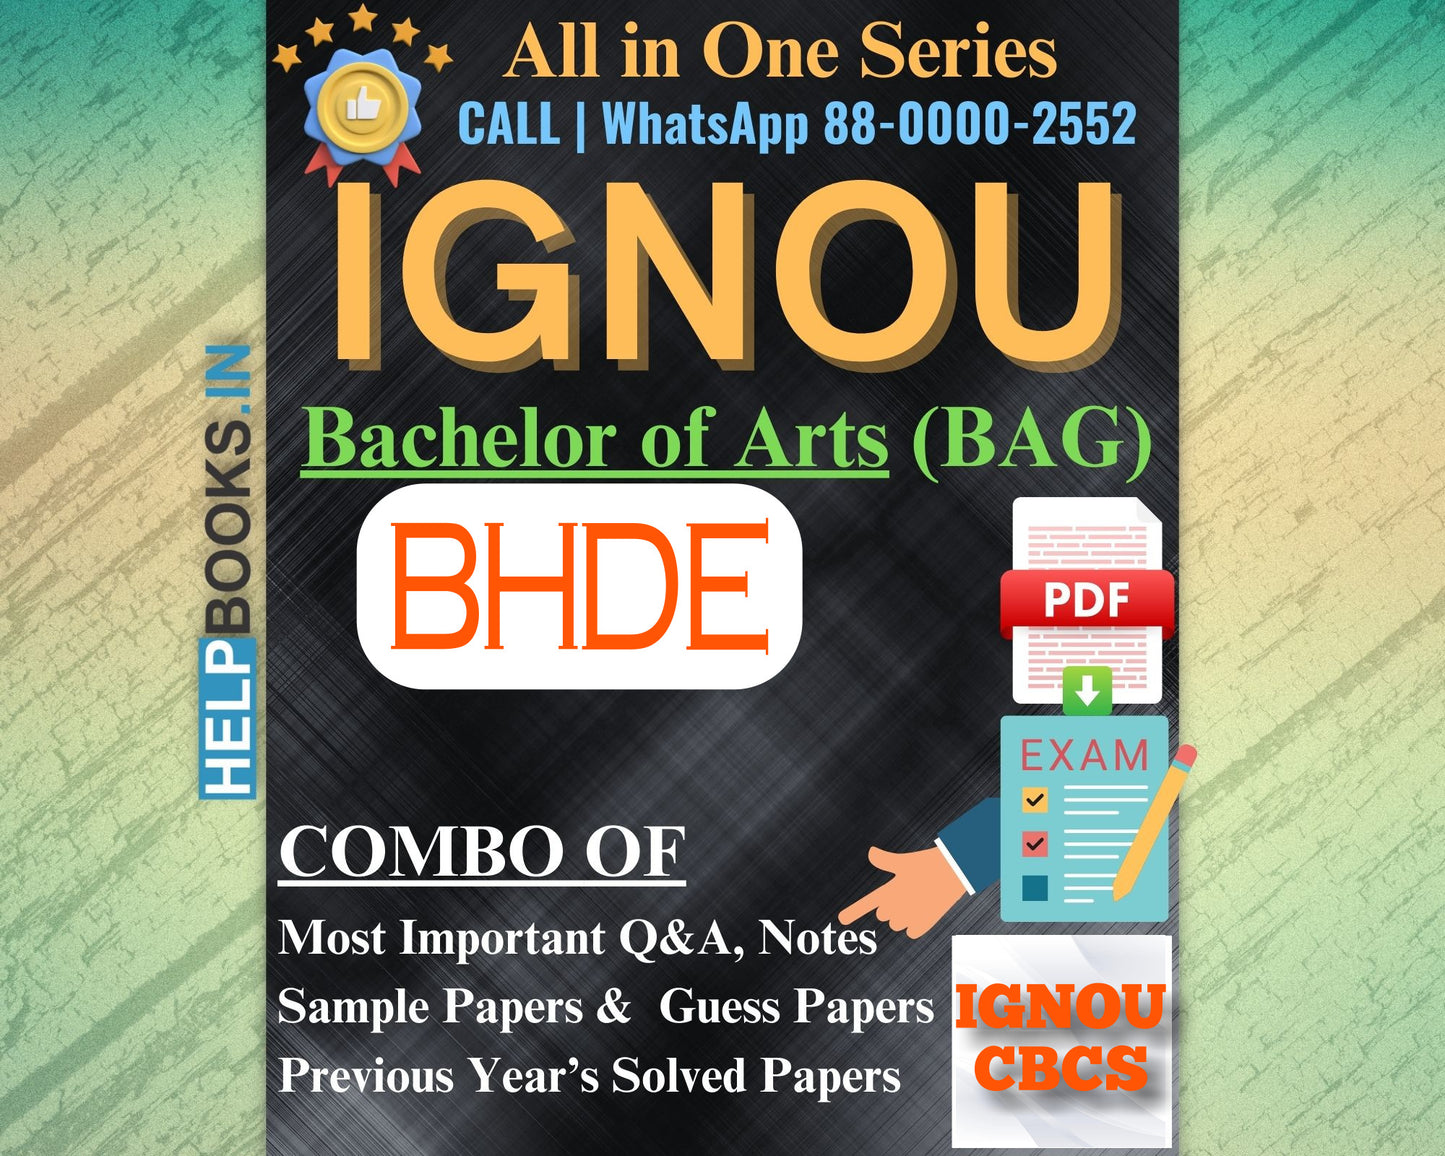 IGNOU BAG Online Study Package: Bachelor of Arts (BA) - Previous Years Solved Papers, Q&A, Exam Notes, Sample Papers, Guess Papers-BHDE141, BHDE142, BHDE143, BHDE144, BHDE145, BHDE146